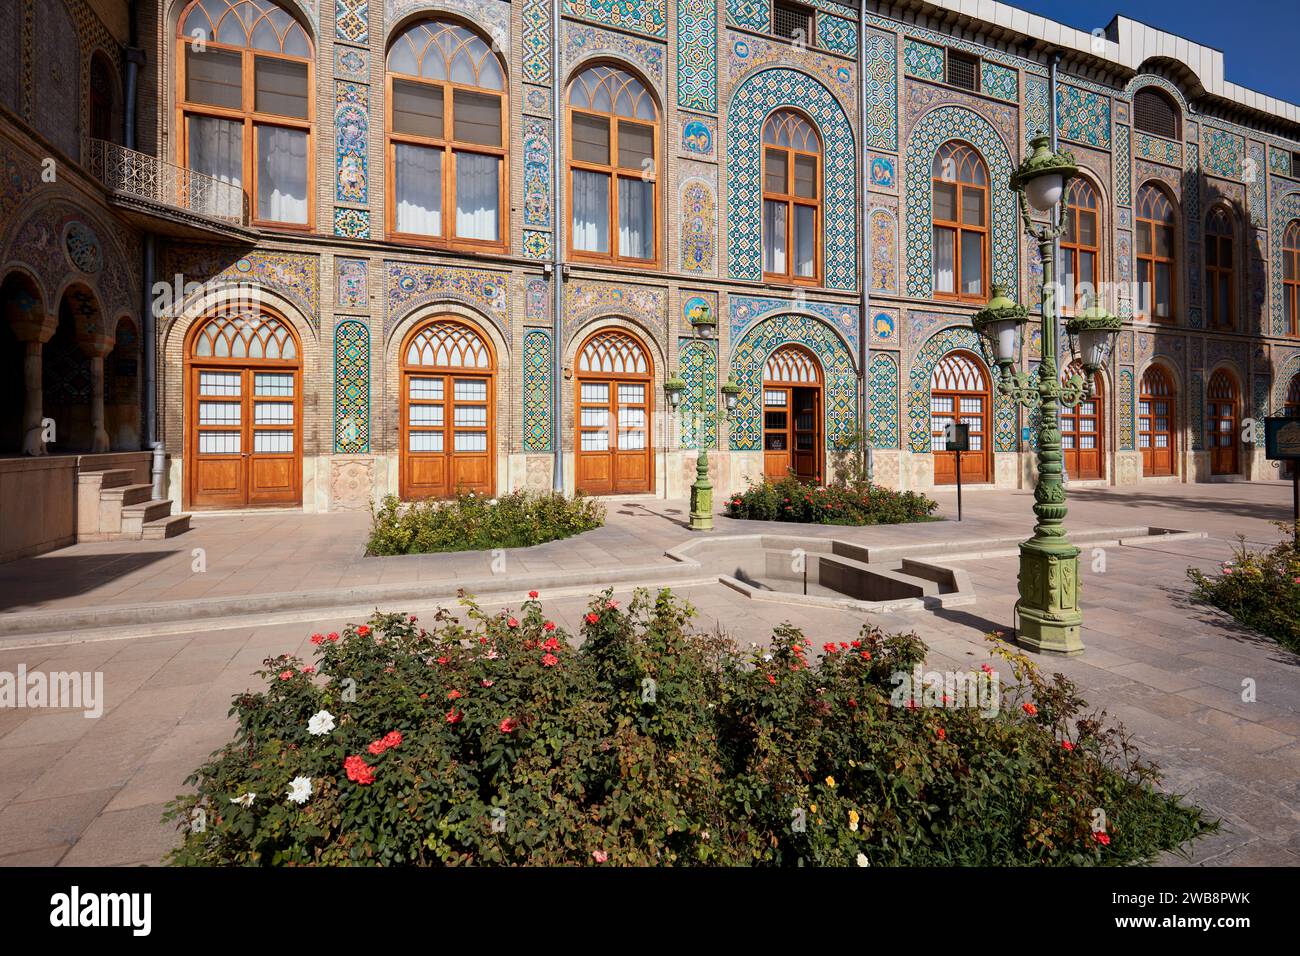 Exterior view of the Golestan Palace, former royal residence of the Qajar dynasty and UNESCO World Heritage Site. Tehran, Iran. Stock Photo